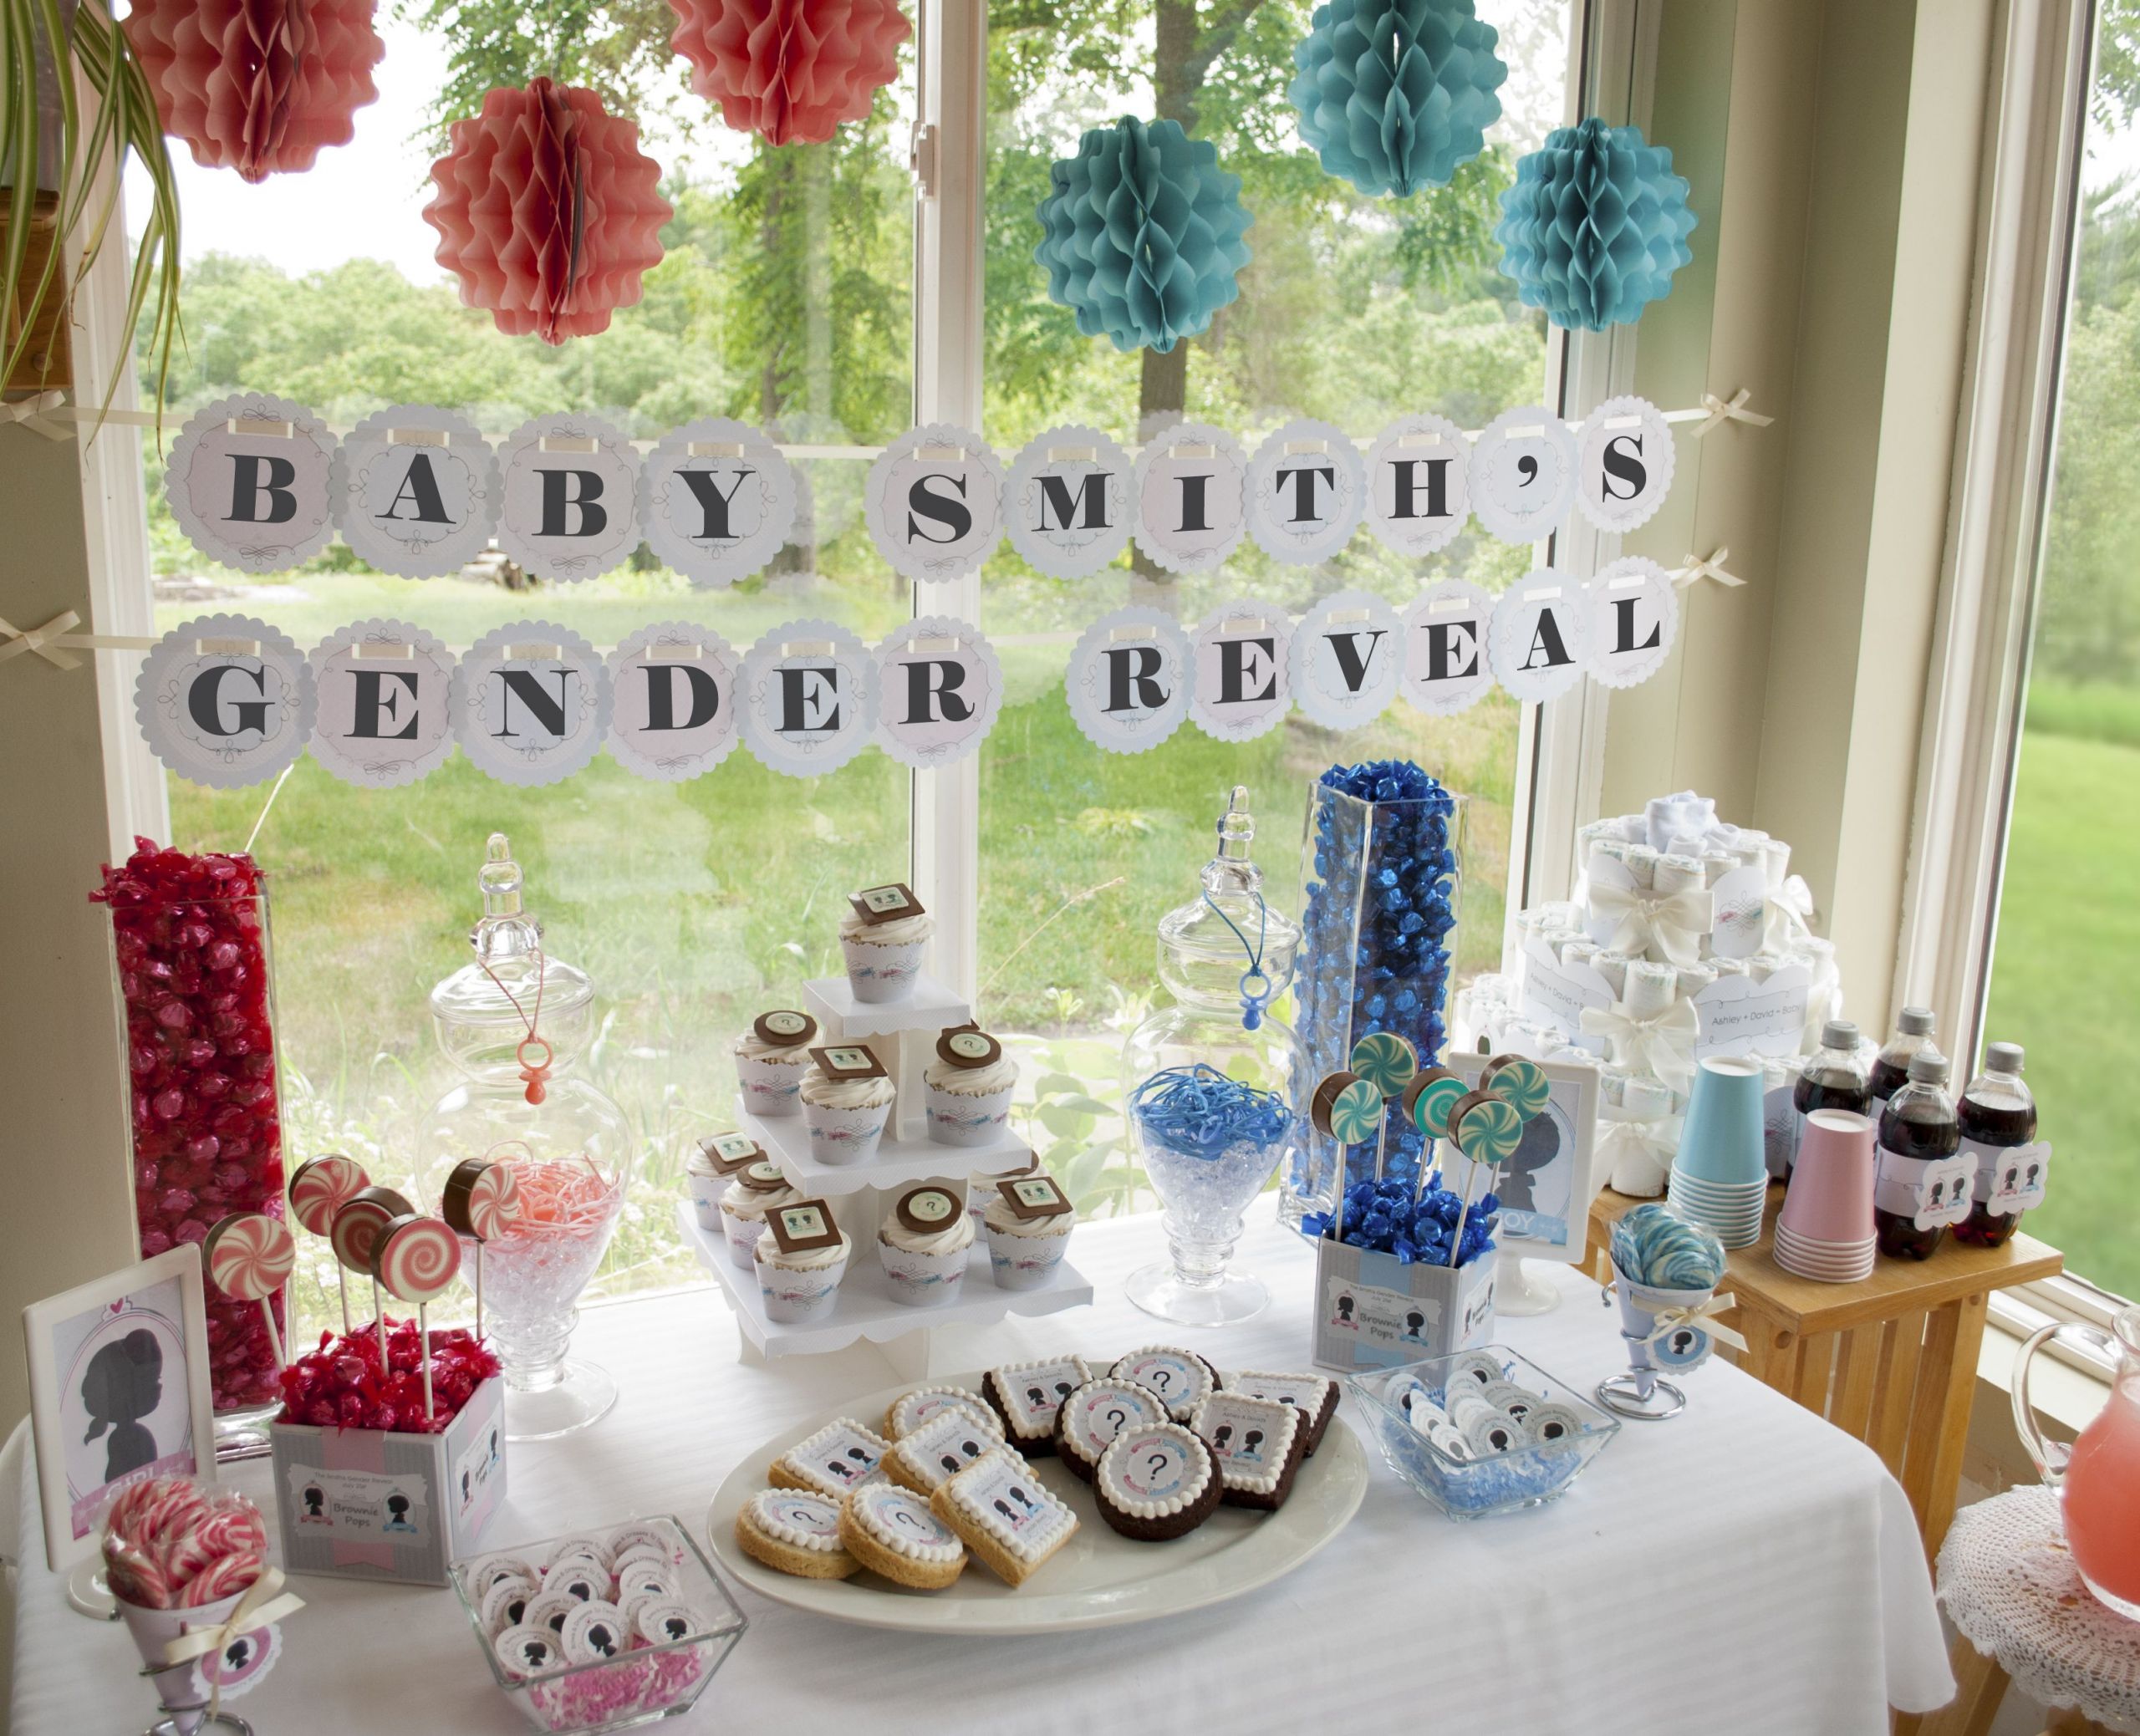 Baby Shower Gender Reveal Party Ideas
 GenderReveal Party Theme Ideas Such a cute idea for